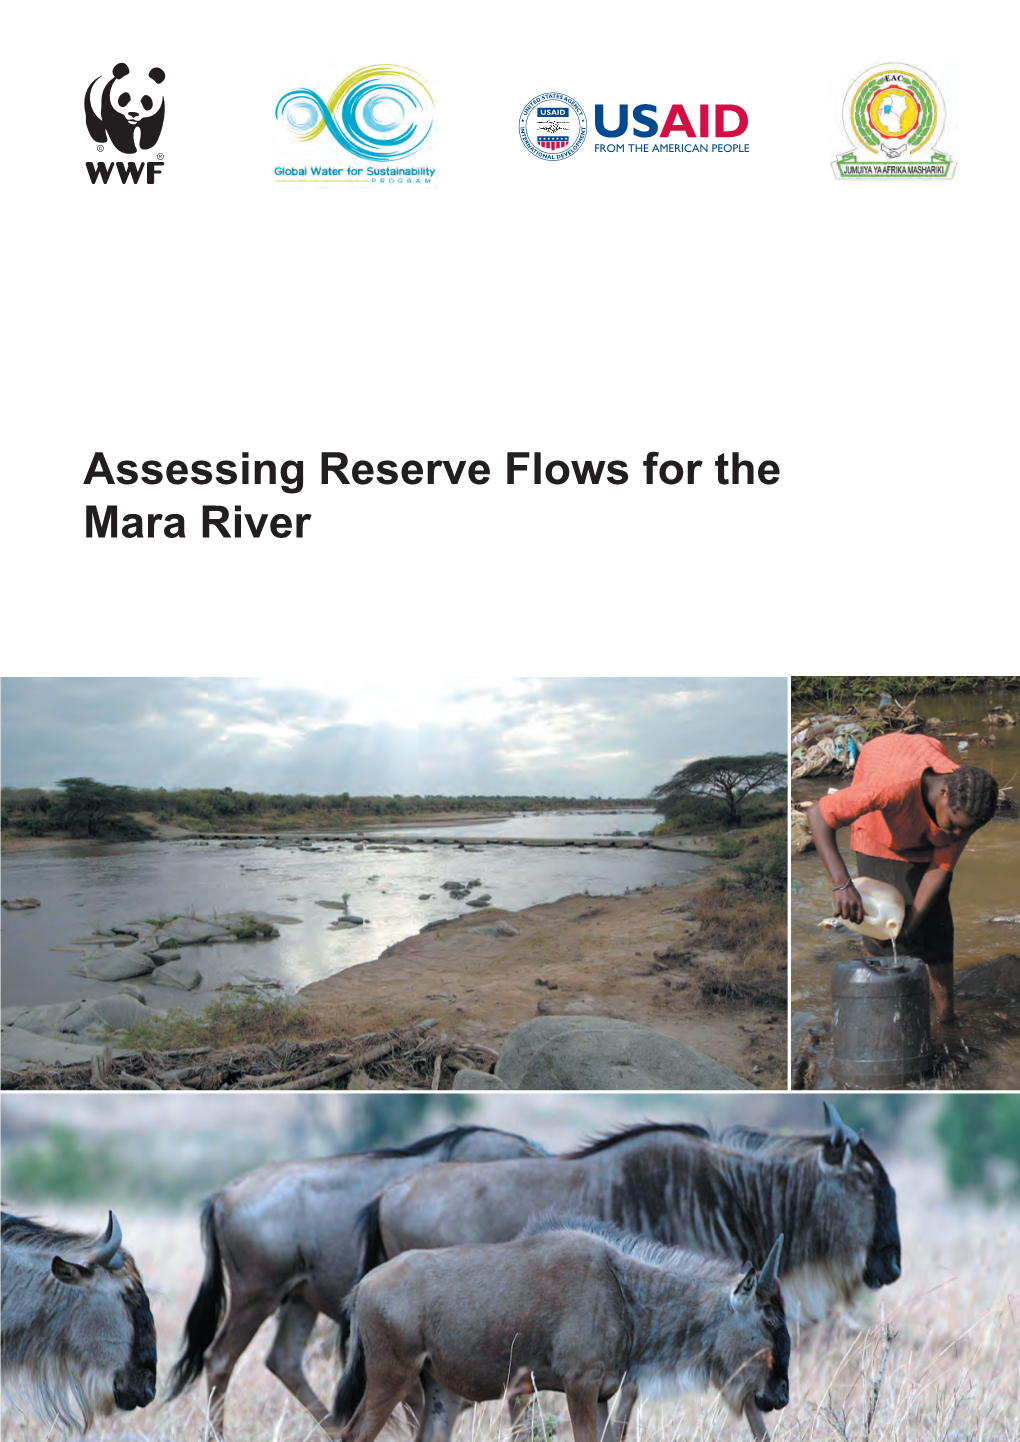 Assessing Reserve Flows for the Mara River